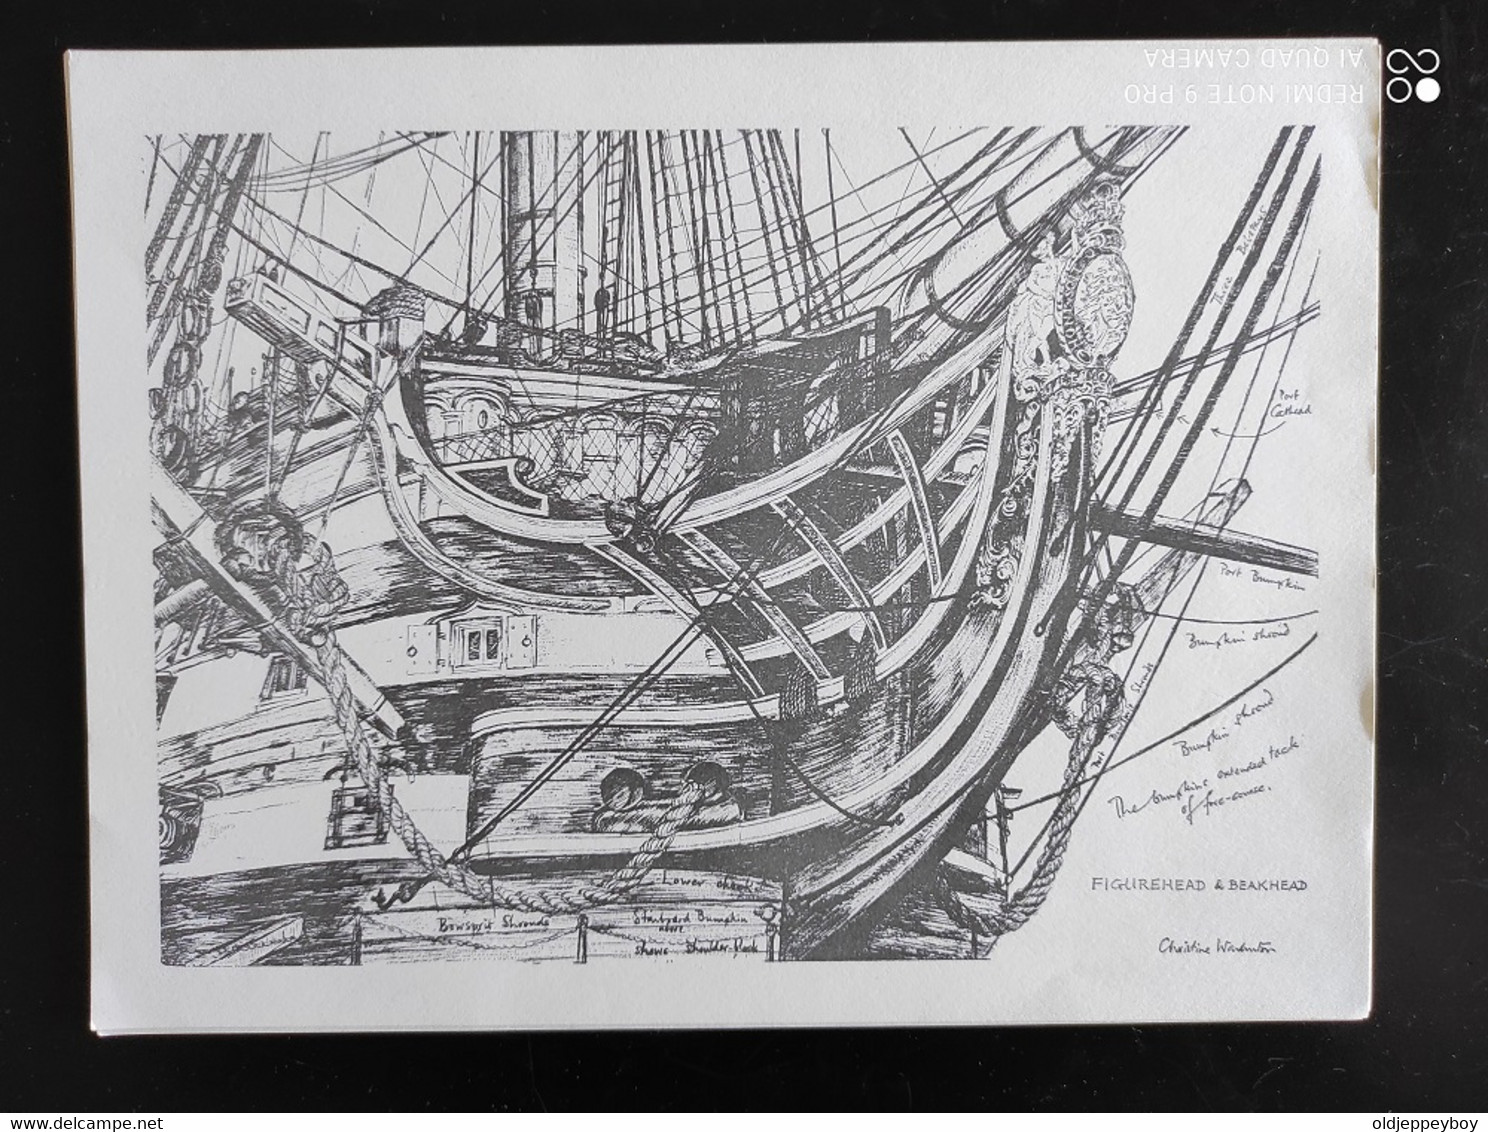 12 DRAWINGS OF PARTS OF LORD NELSON'S FAMOUS FLAGSHIP H.M.S VICTORY - Autres Plans